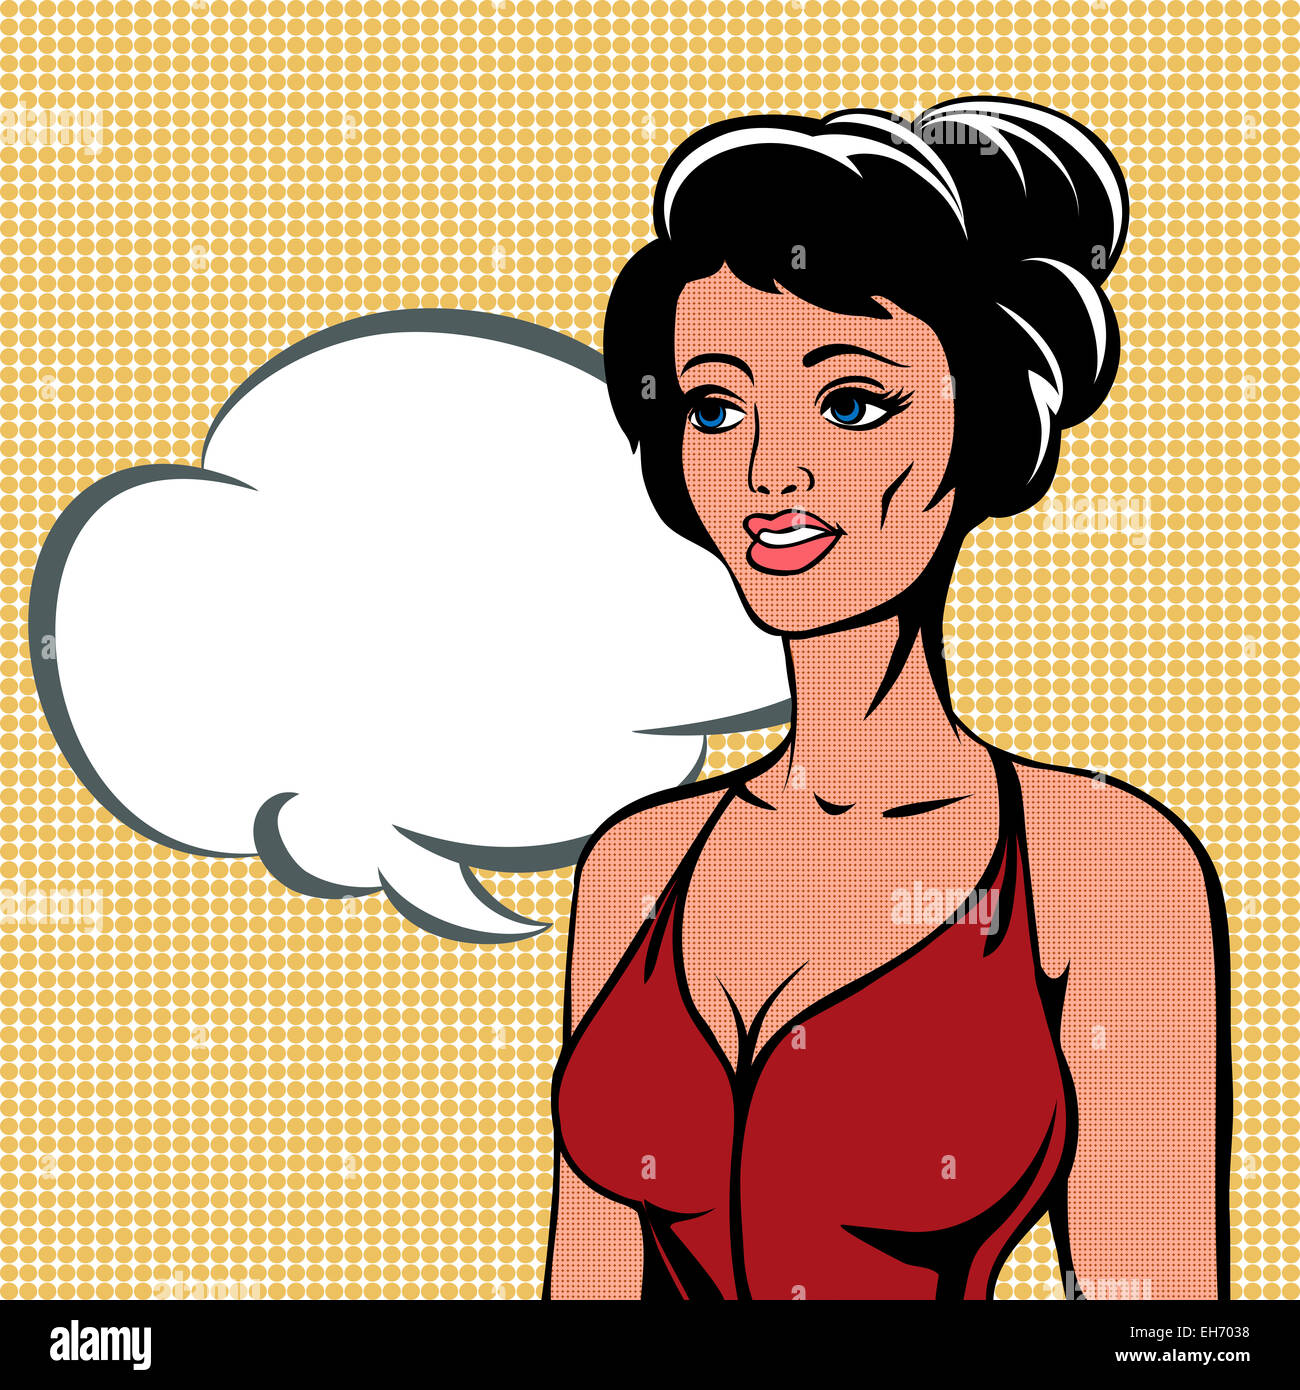 Illustration with talking woman against speech bubble drawn in vintage style with use halftone pattern Stock Photo